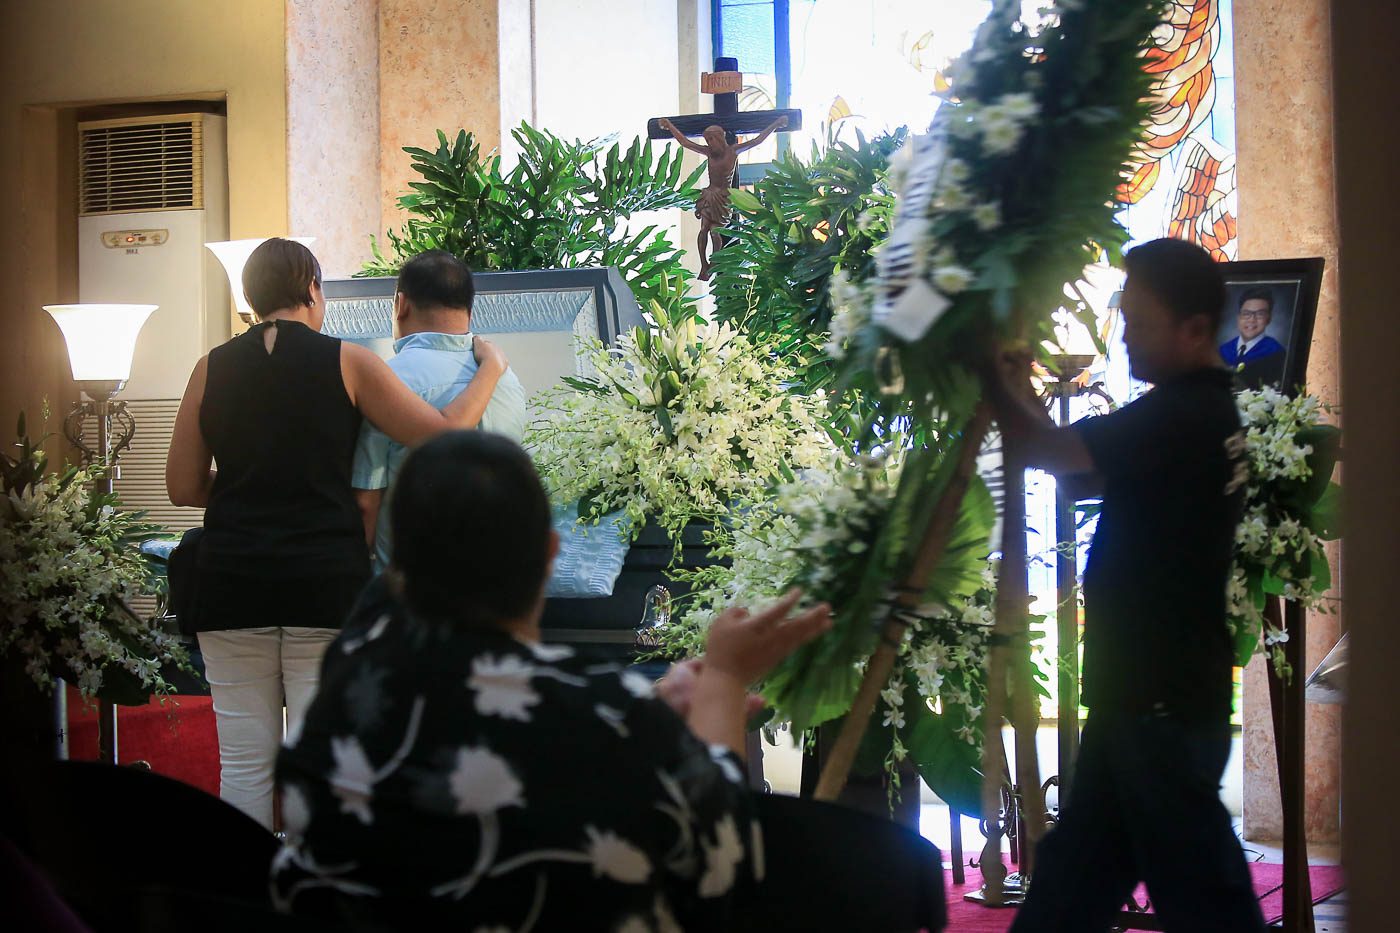 Castillo family: ‘Atio was killed by criminals from Aegis Juris fraternity’